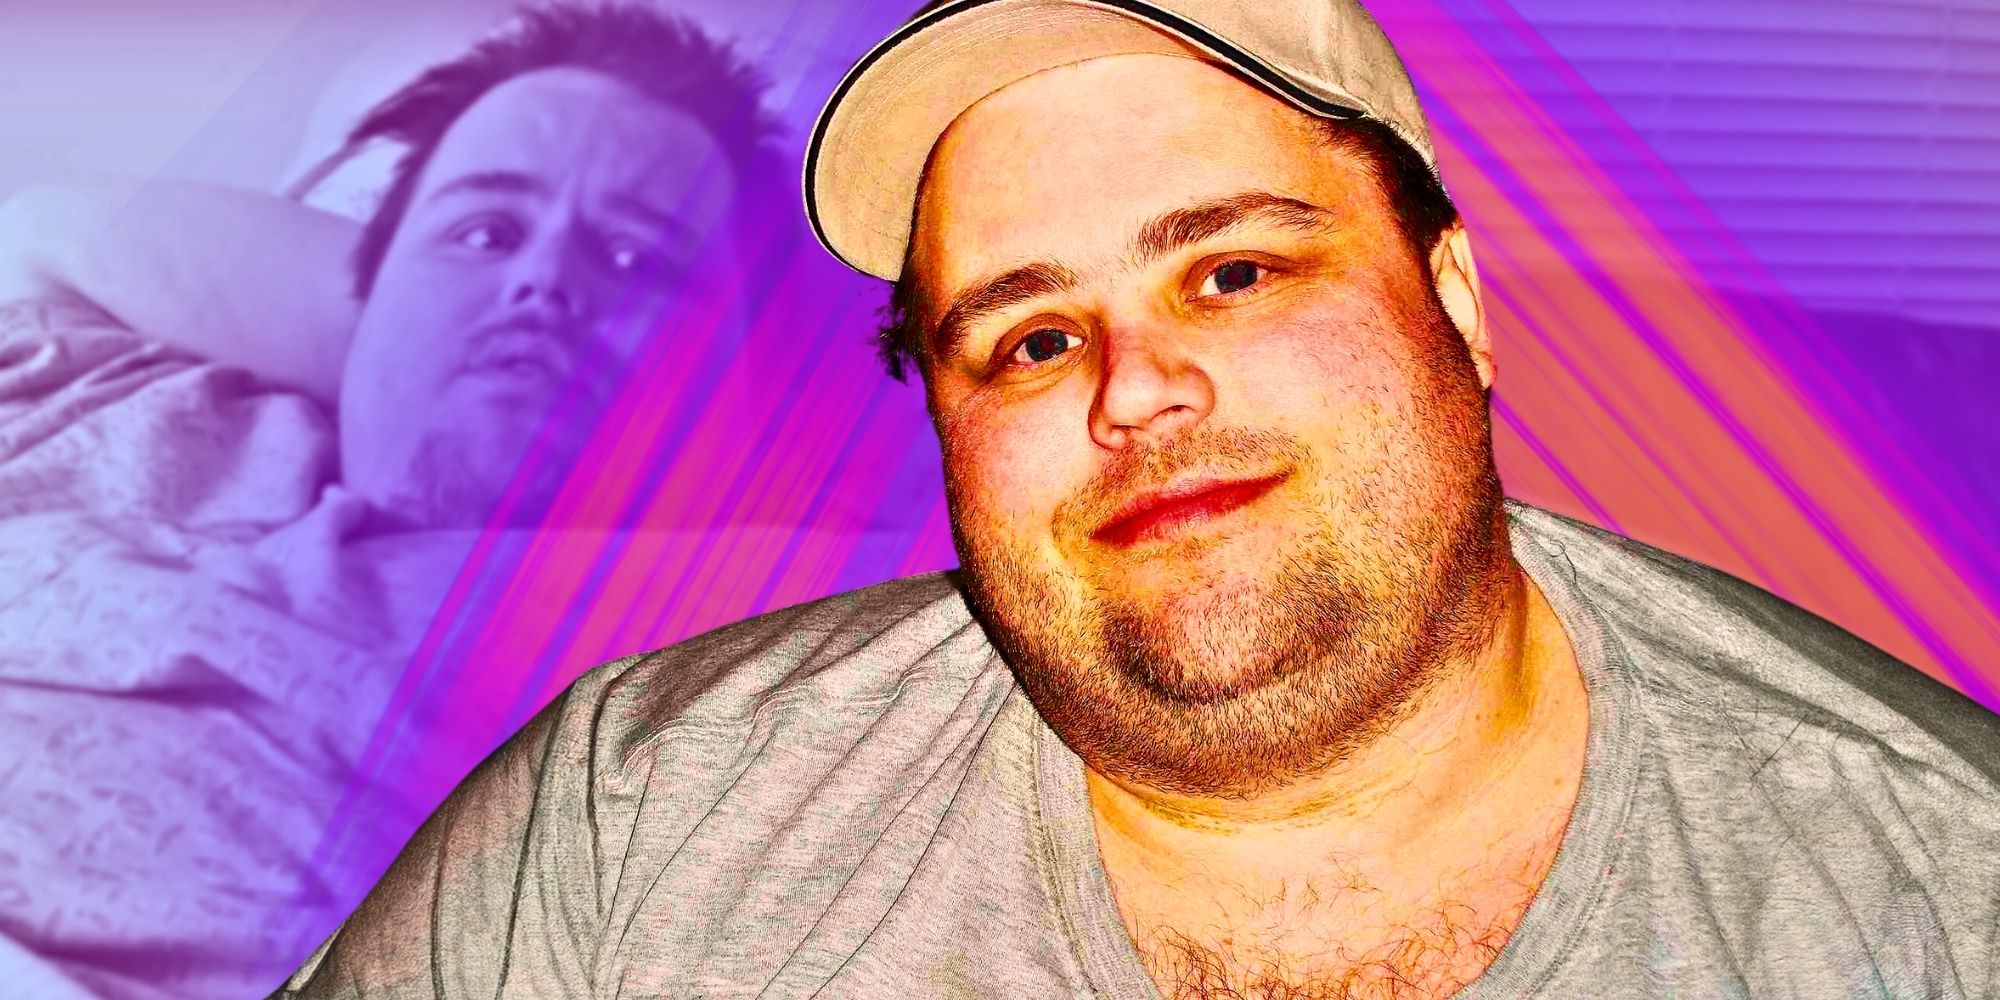 James King From My 600-Lb Life montage